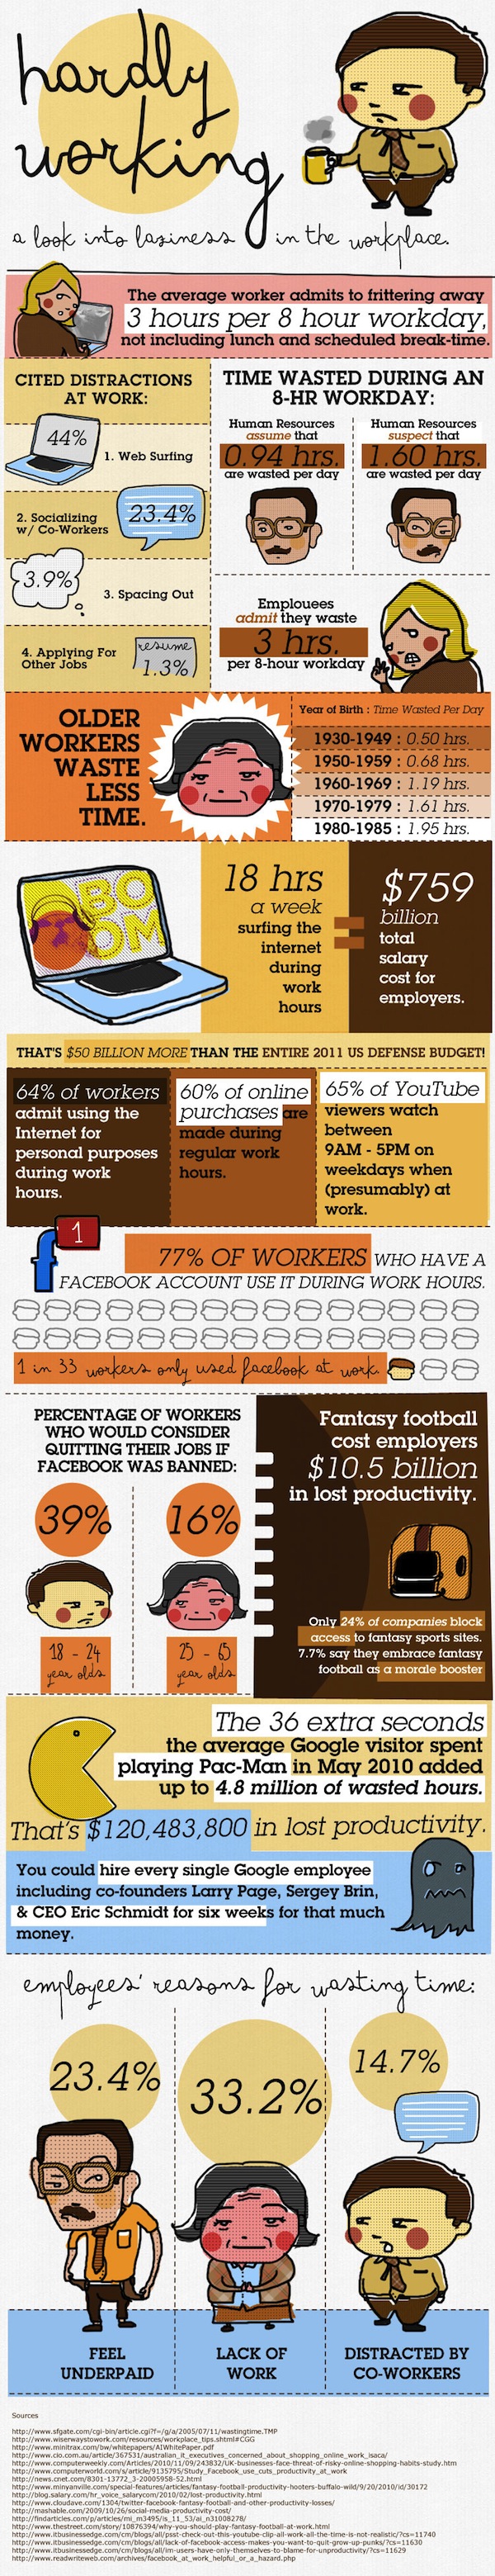 infographic workplace